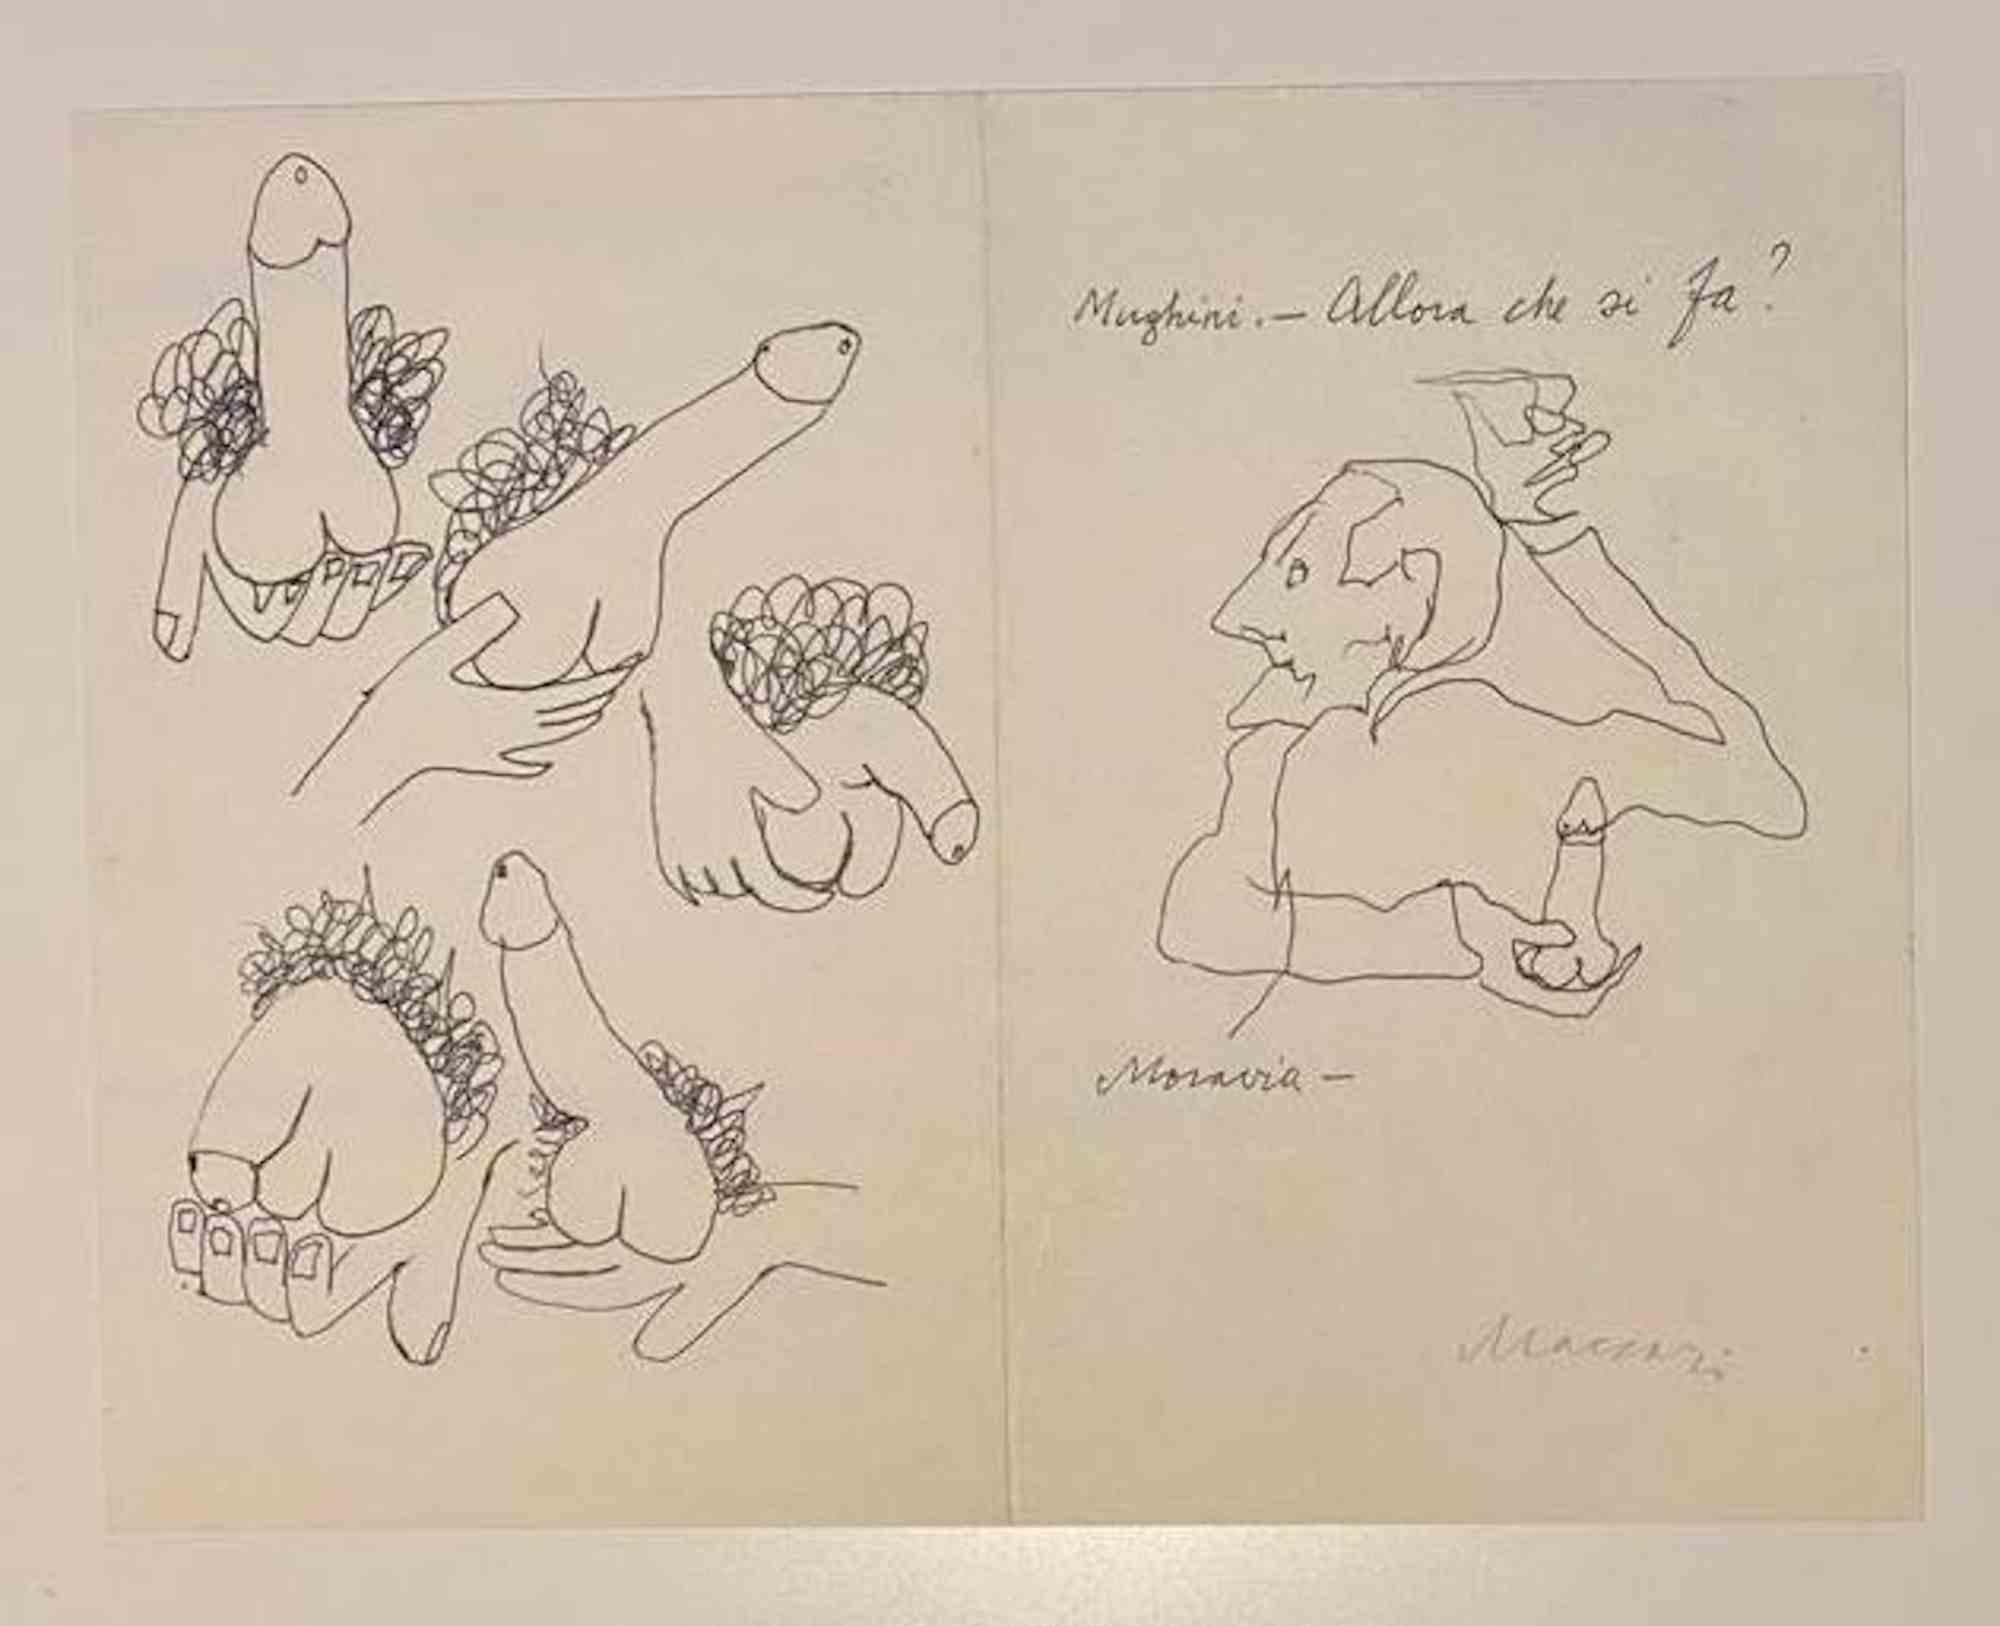 What do we do? is a pen Drawing realized by Mino Maccari  (1924-1989) in the Mid-20th Century.

Hand-signed on the lower.

Good conditions.

Mino Maccari (Siena, 1924-Rome, June 16, 1989) was an Italian writer, painter, engraver and journalist,